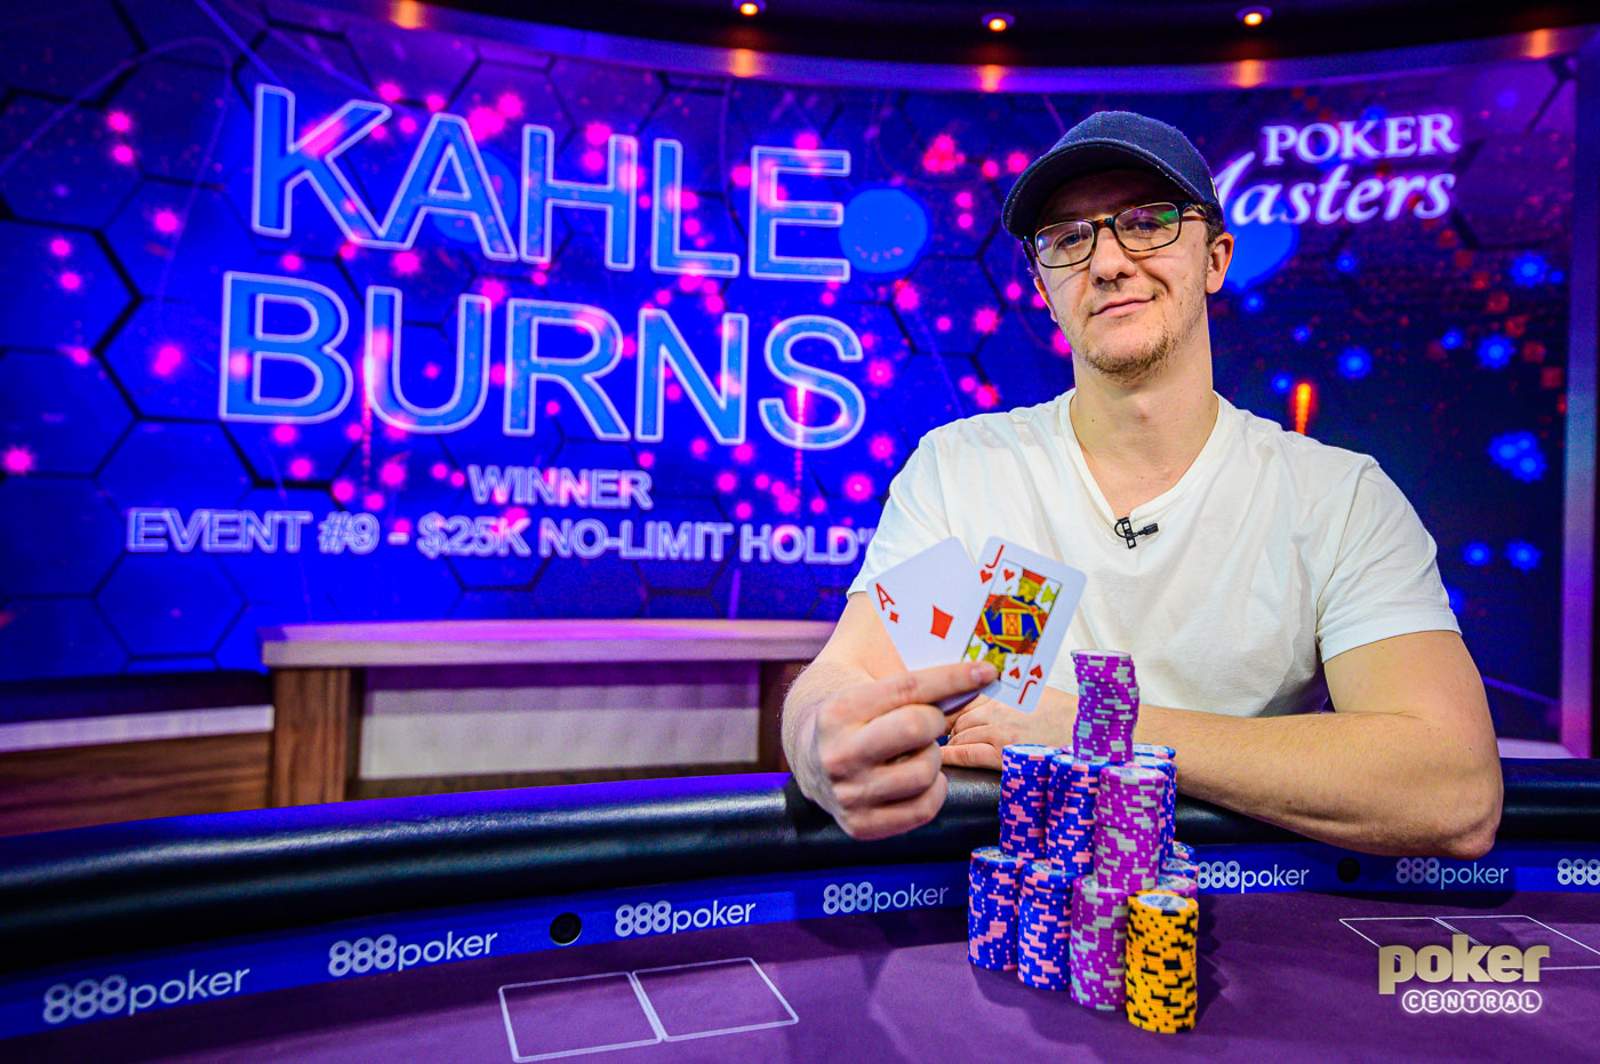 Kahle Burns Wins Poker Masters Event #9 for $416,500